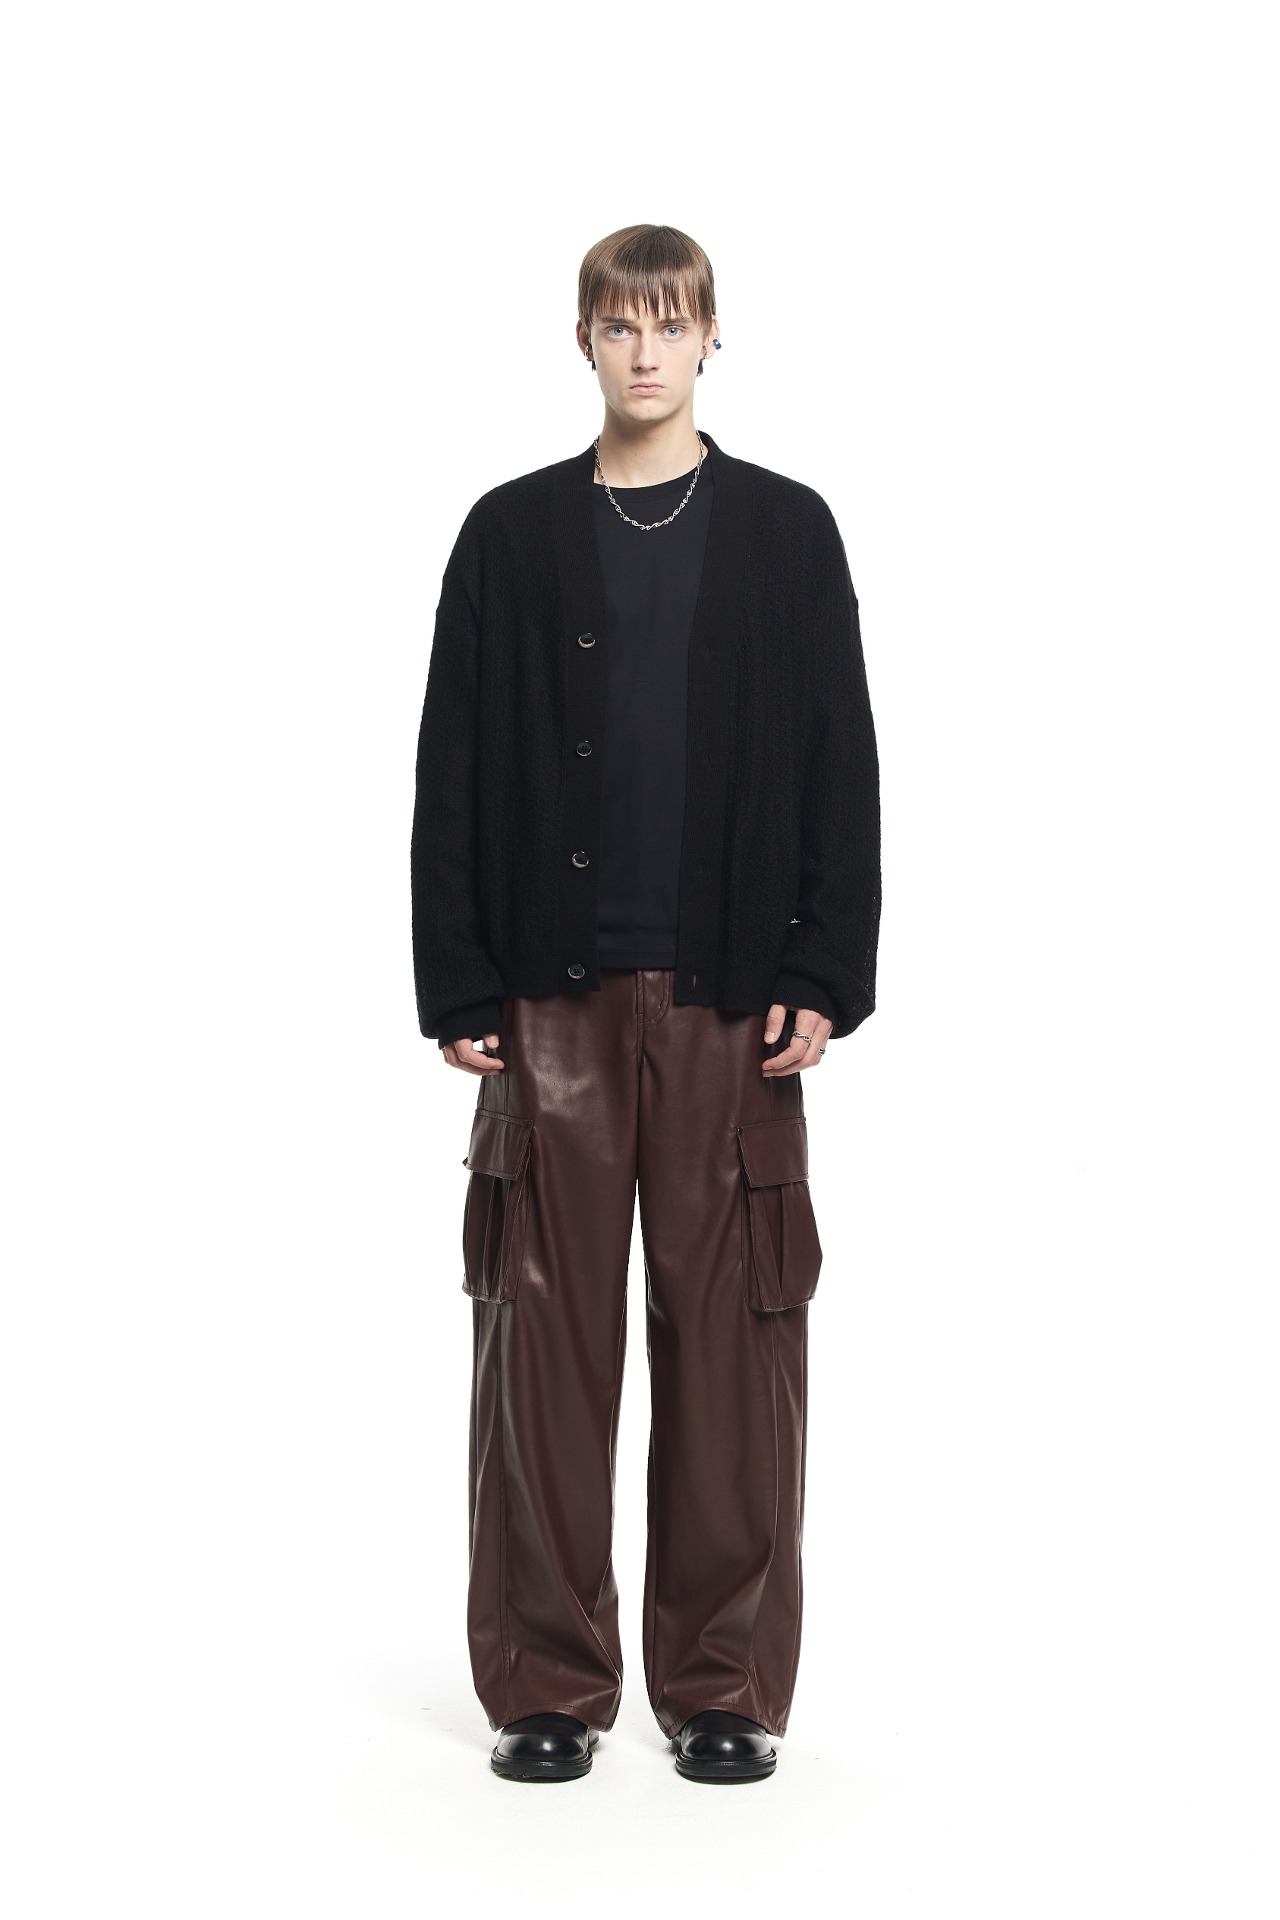 LEATHER OUT CARPENTER WIDE PANTS RED메종미네드 MAISON MINED 메종미네드